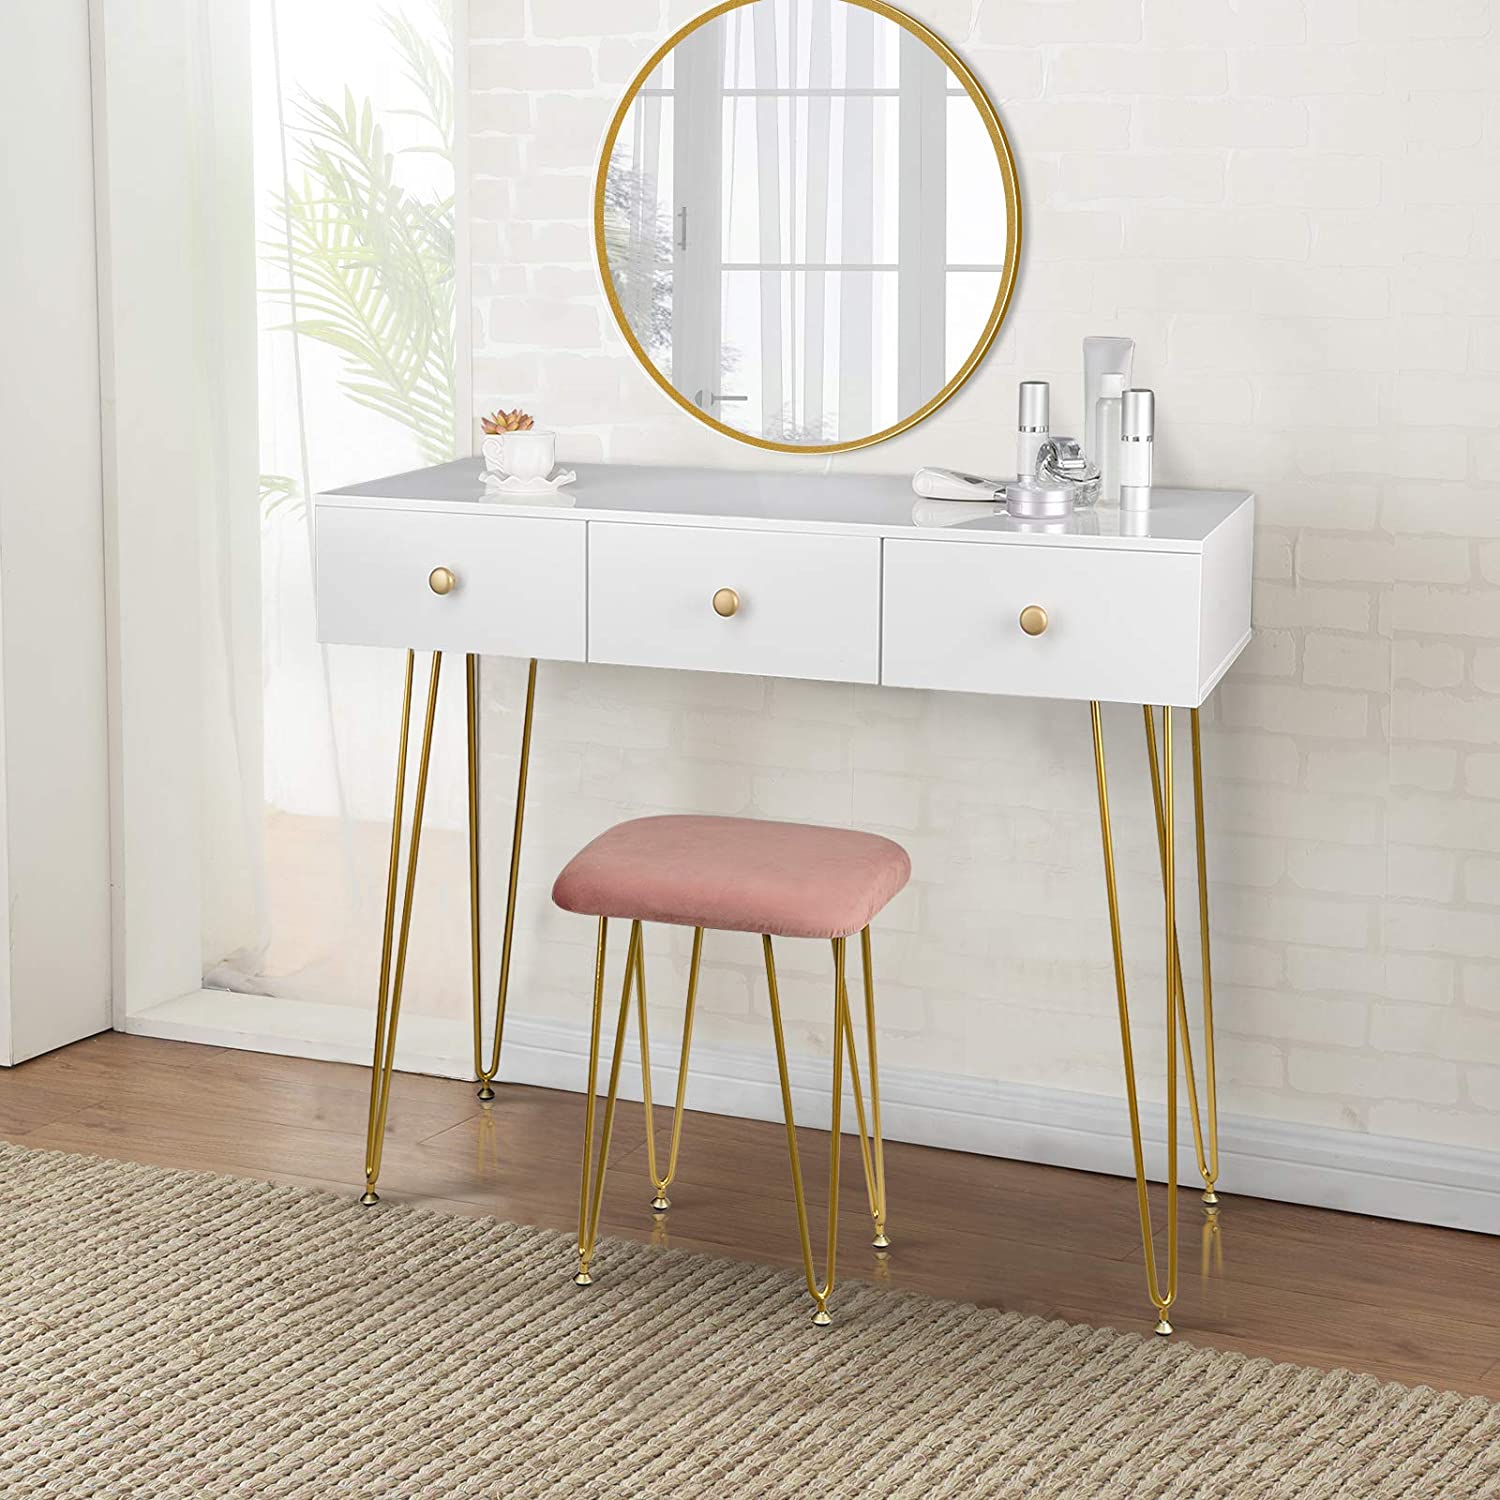 White & Gold Dressing Table with Drawers, Mirror & Stool